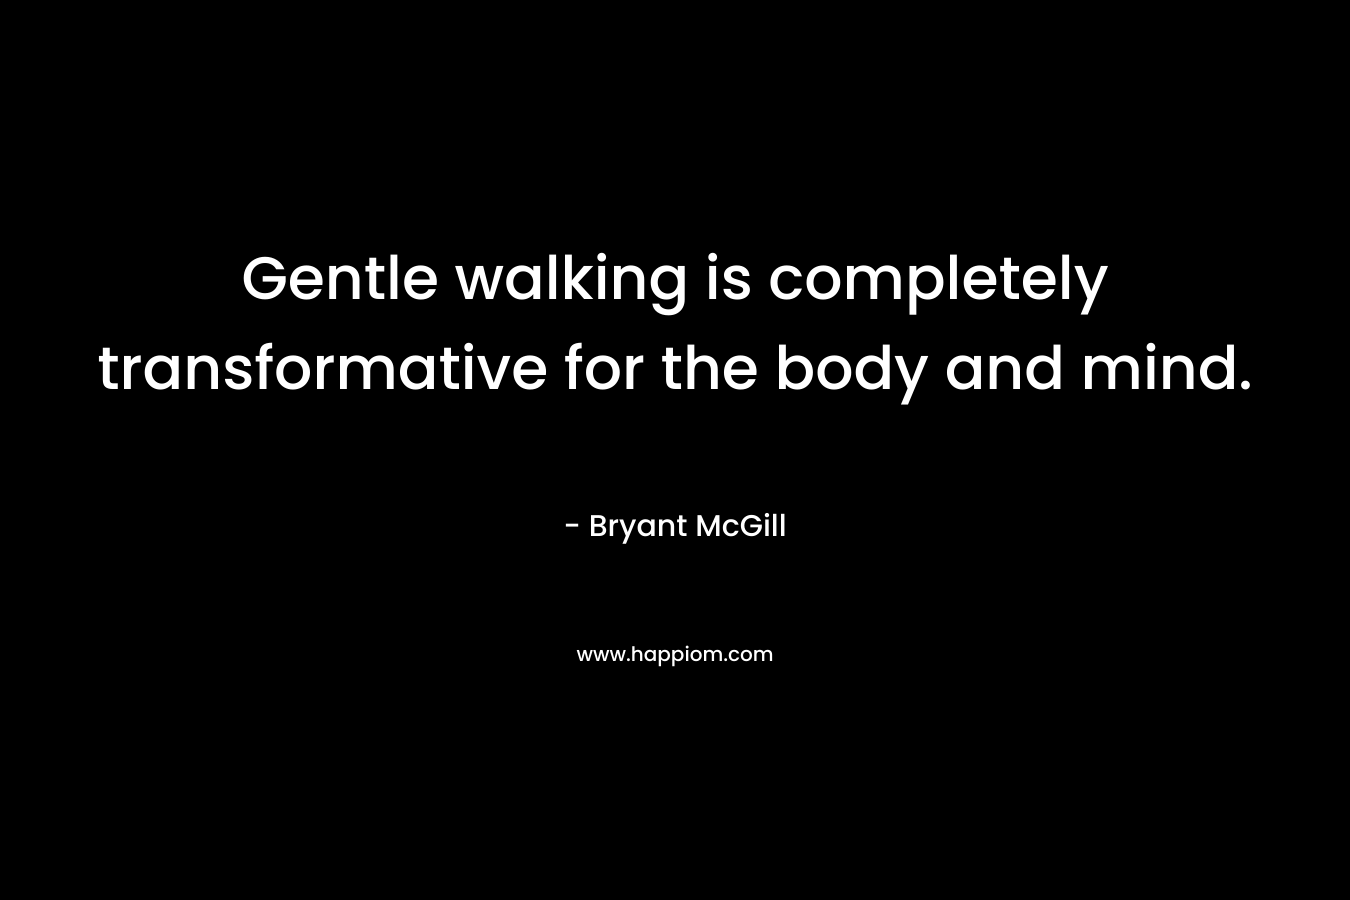 Gentle walking is completely transformative for the body and mind.